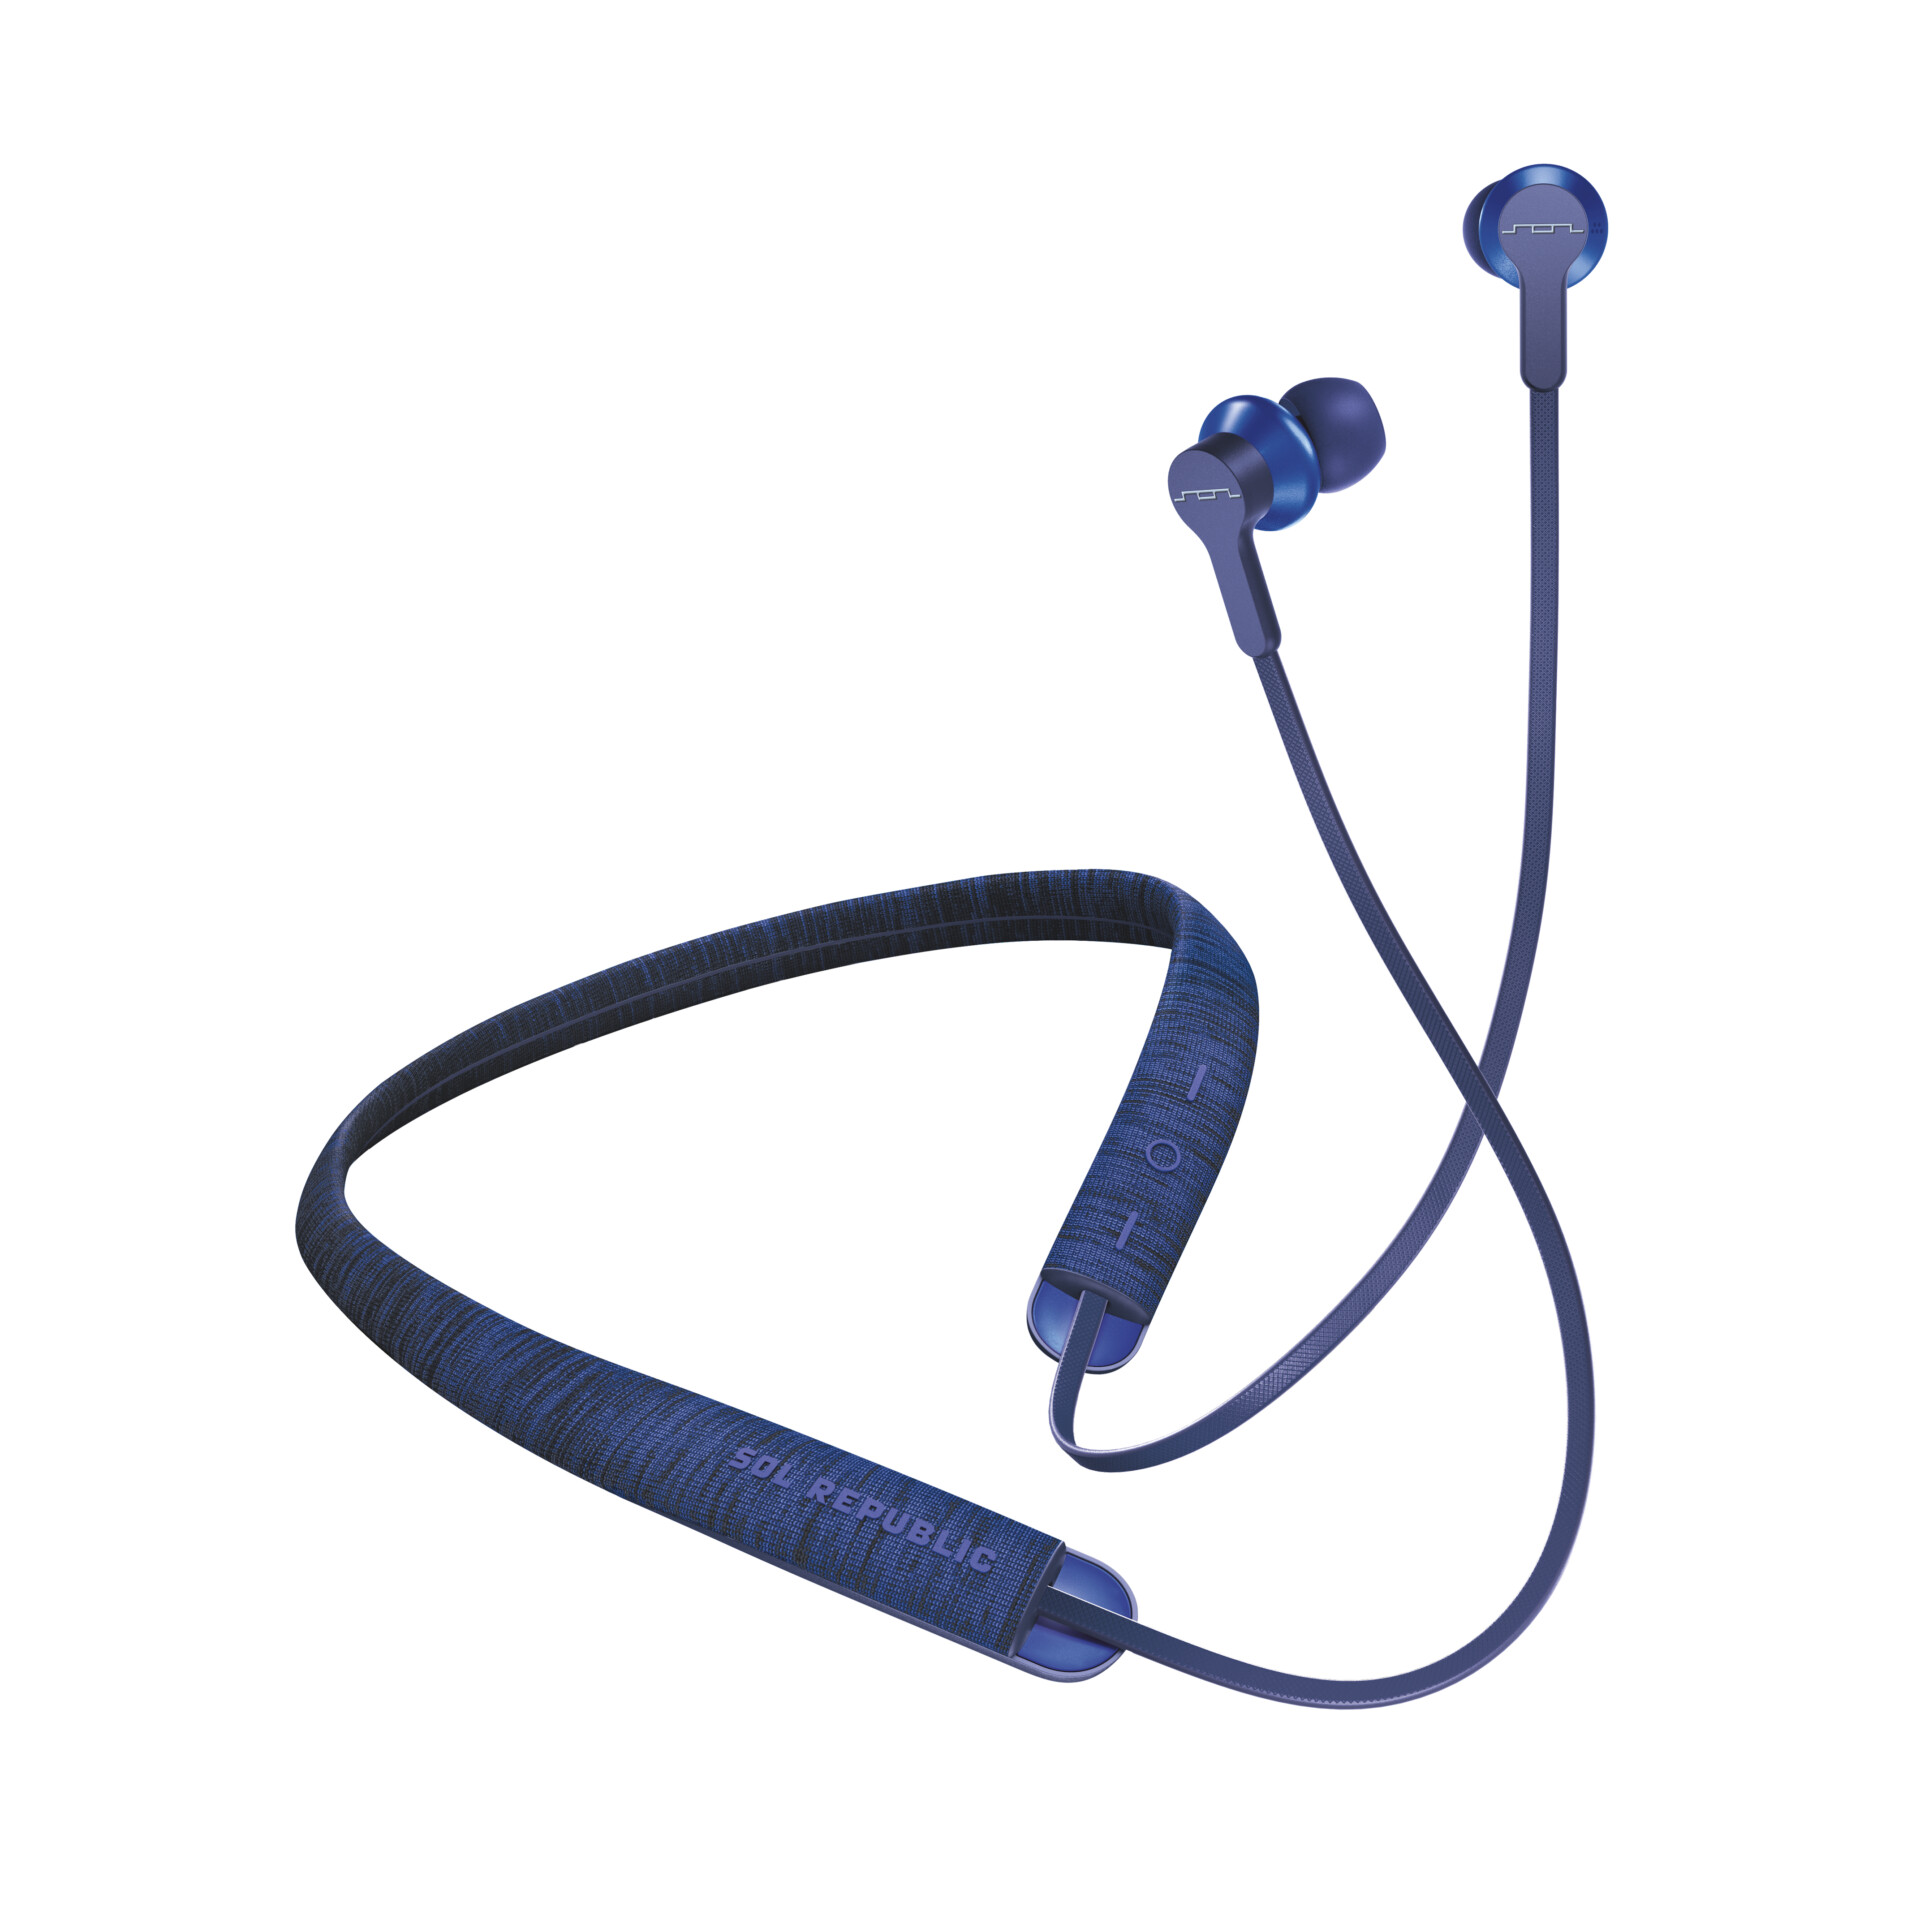 Sol Republic Shadow Fusion with Tile wireless neckband earbuds in blue on white background.